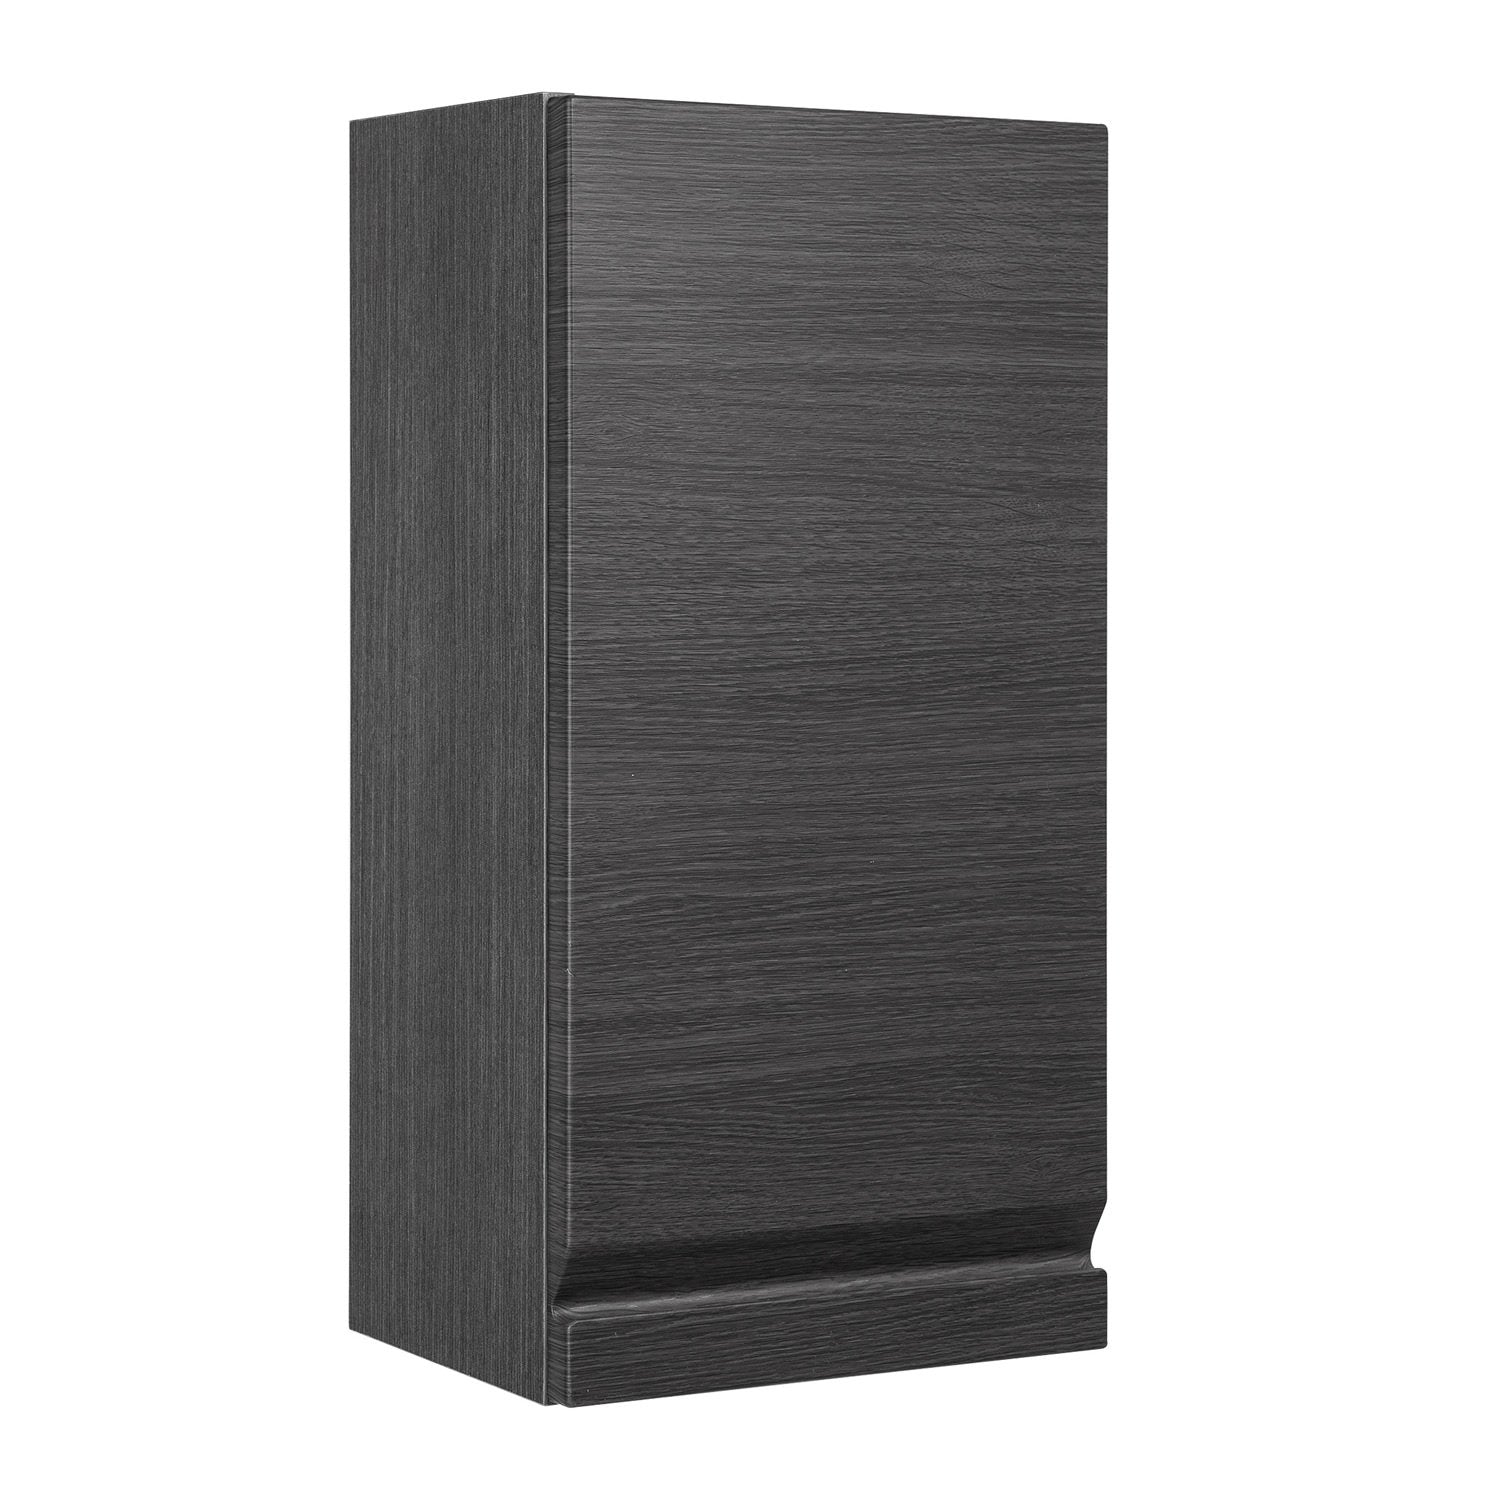 16" Small Side Cabinet, Wall Mount, 1 Door whit Soft Close and Left Opening, Grey, Serie Solco by VALENZUELA